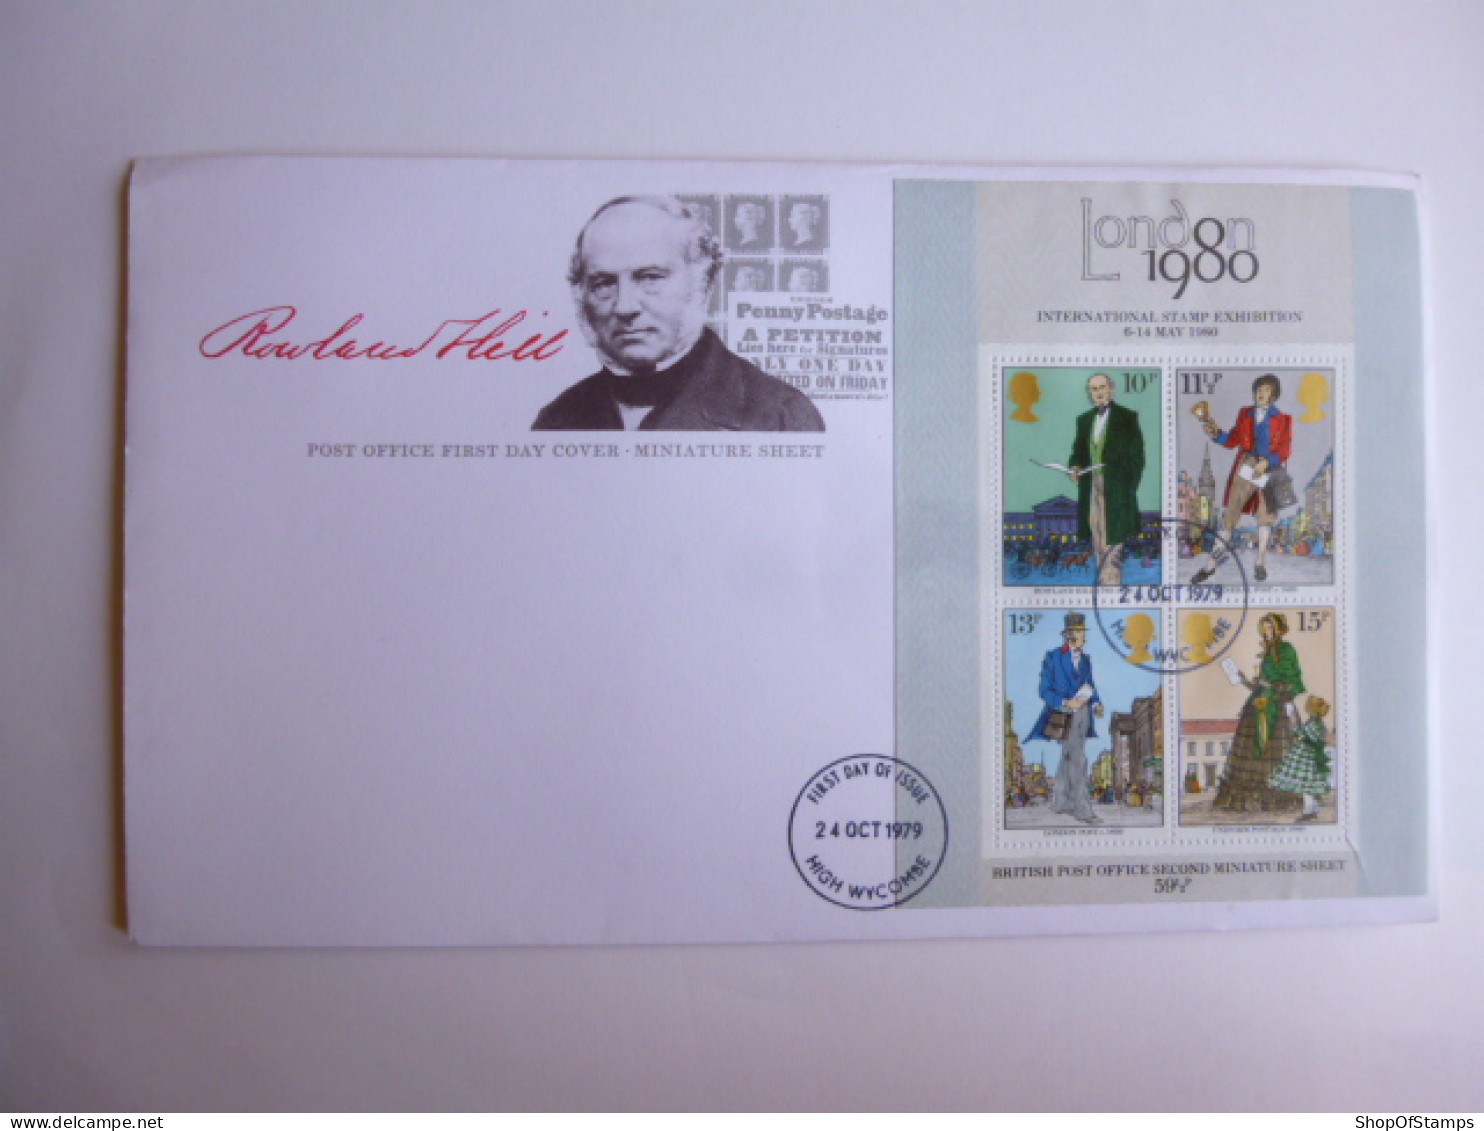 GREAT BRITAIN SG 1099MS SIR ROWLAND HILL DEATH ANNIVERSARY   FDC HIGH WYCOME - Zonder Classificatie